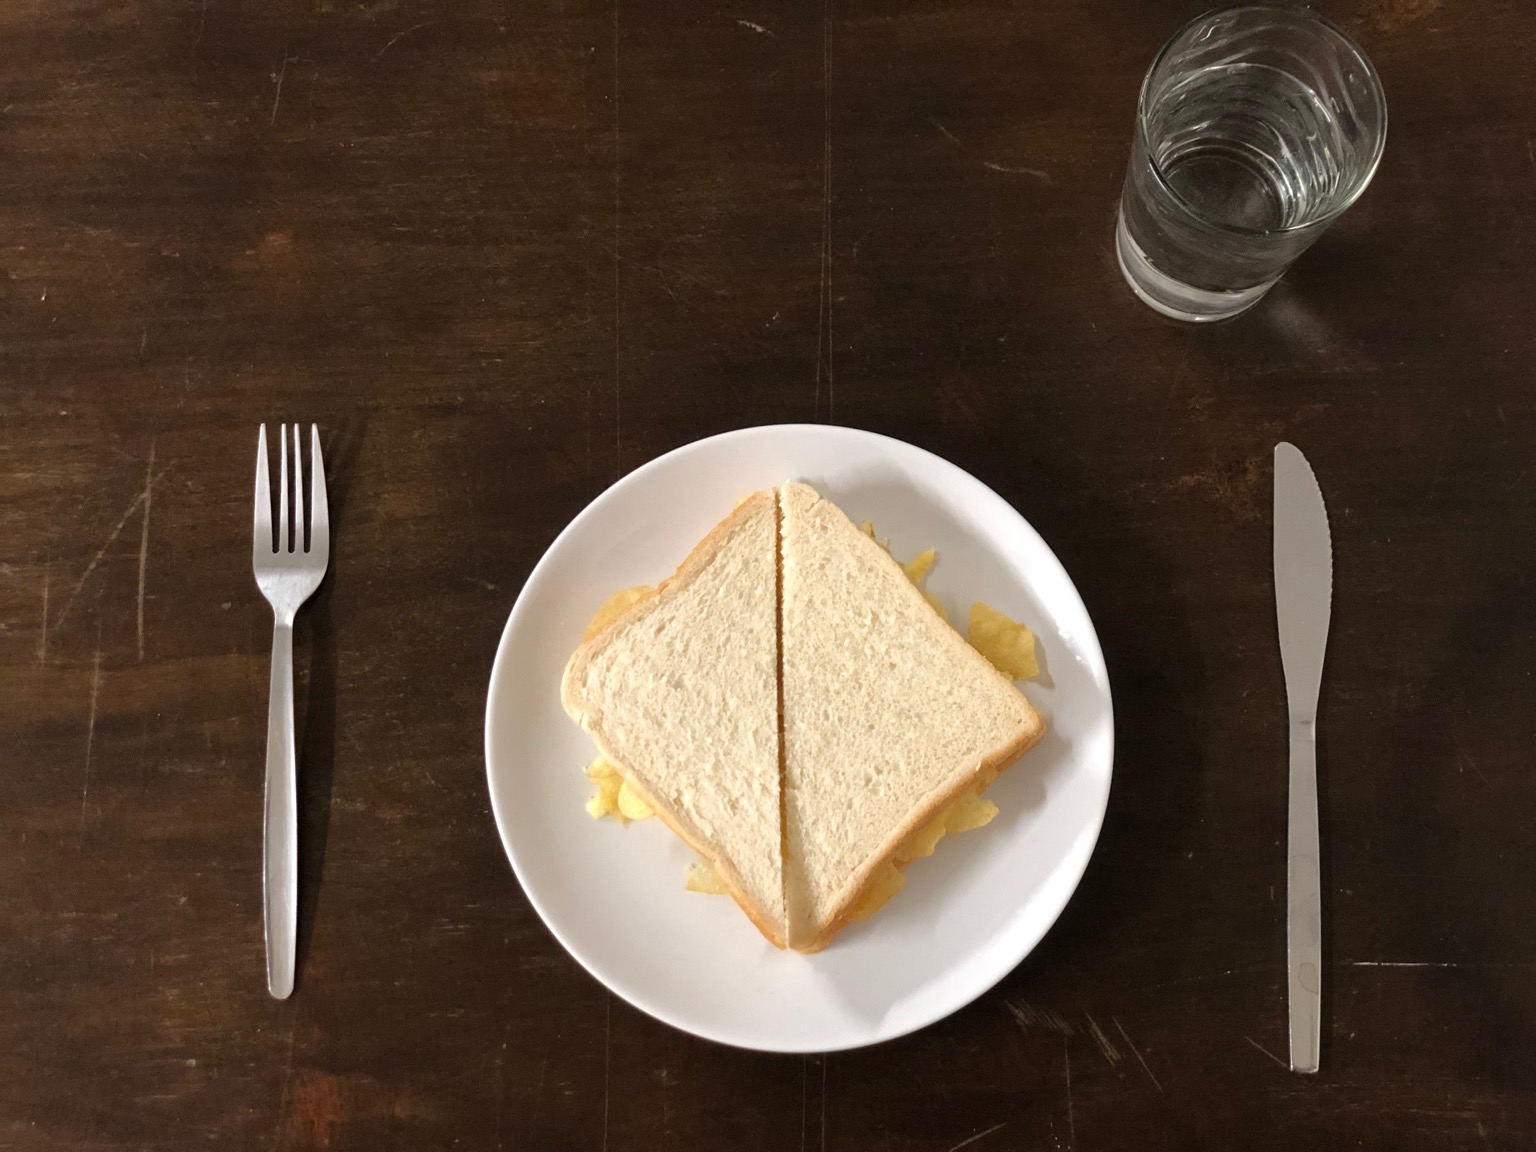 Diagonally-cut crisp sandwich with knife and fork